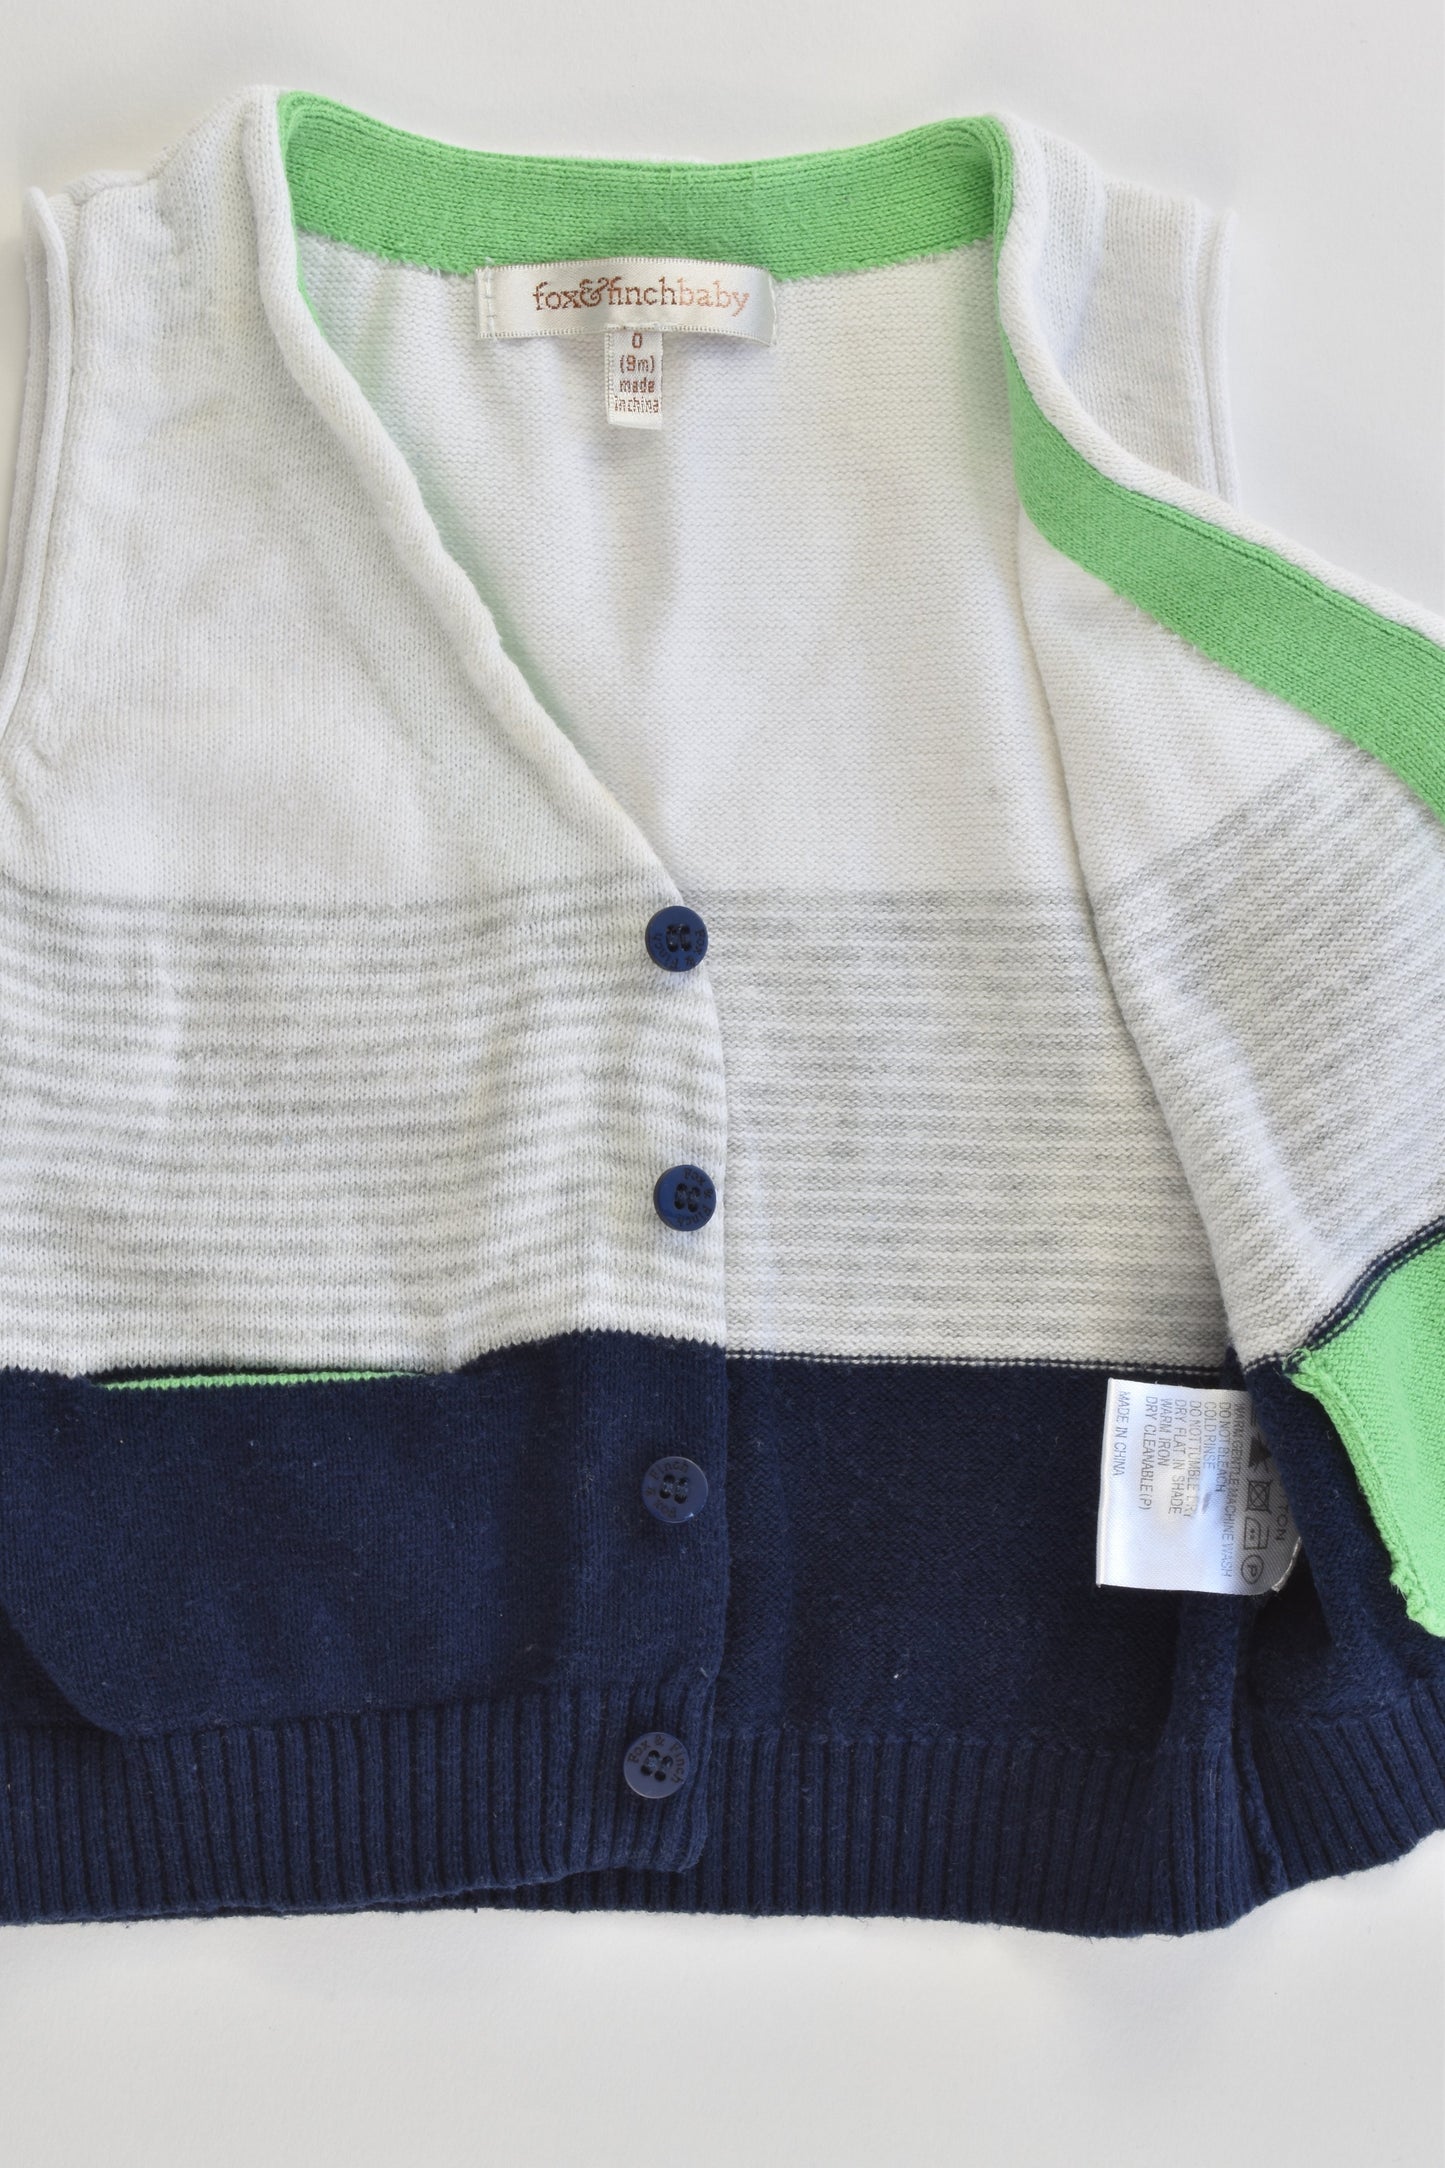 Fox & Finch Baby Size 0 (9 months) Knitted Vest